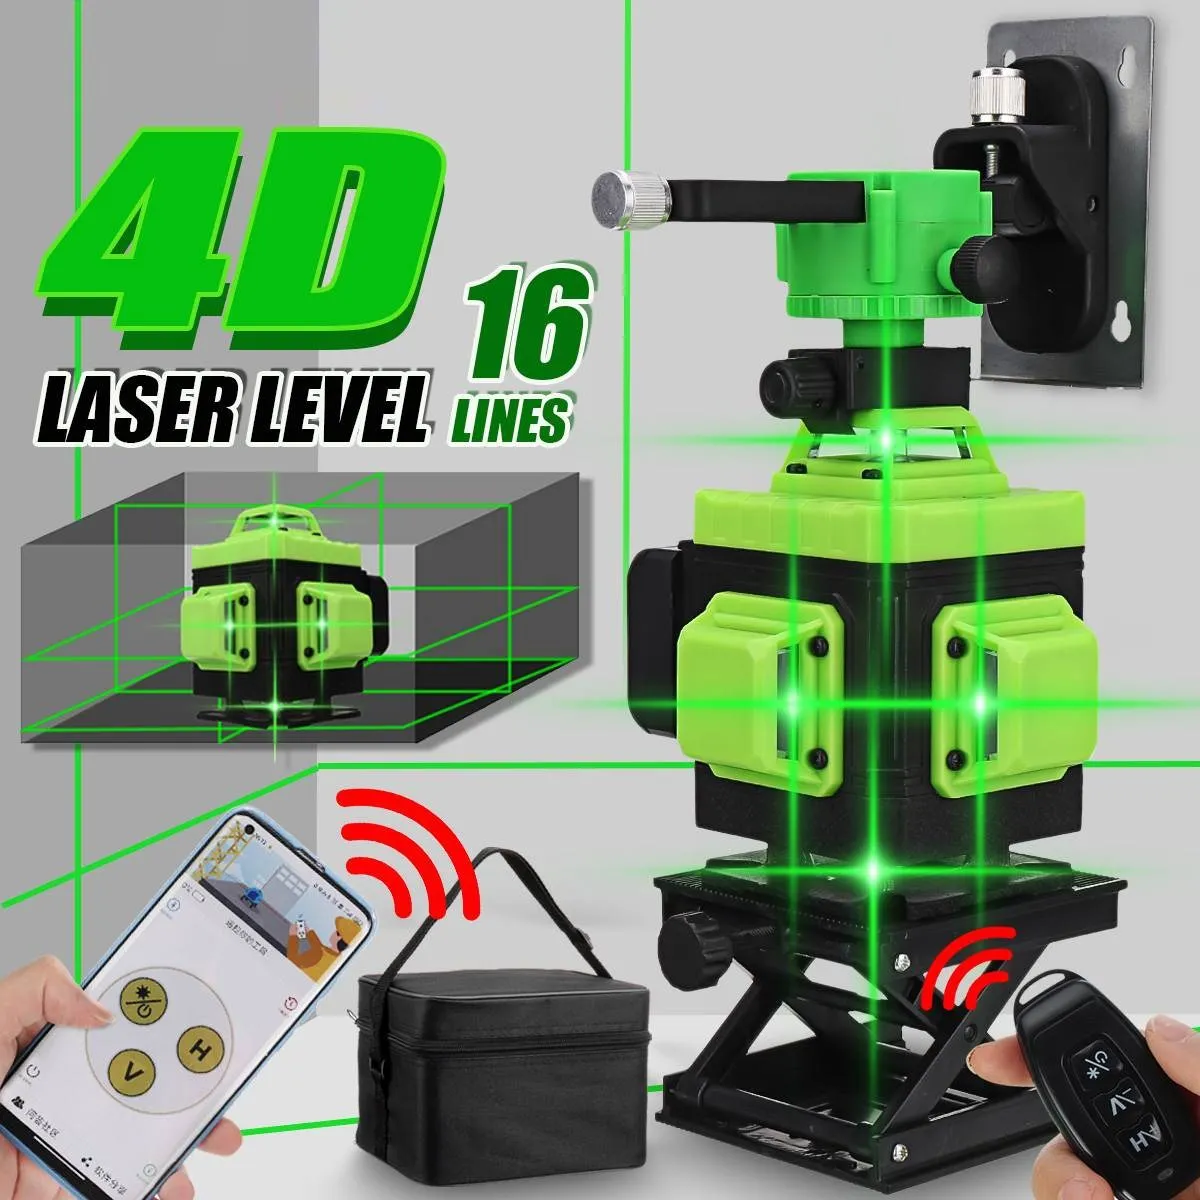 FASGet APP Control 16 Lines 4D Laser Level SelfLeveling 360 Horizontal And Vertical Cross Super Powerful Green Light Laser Level